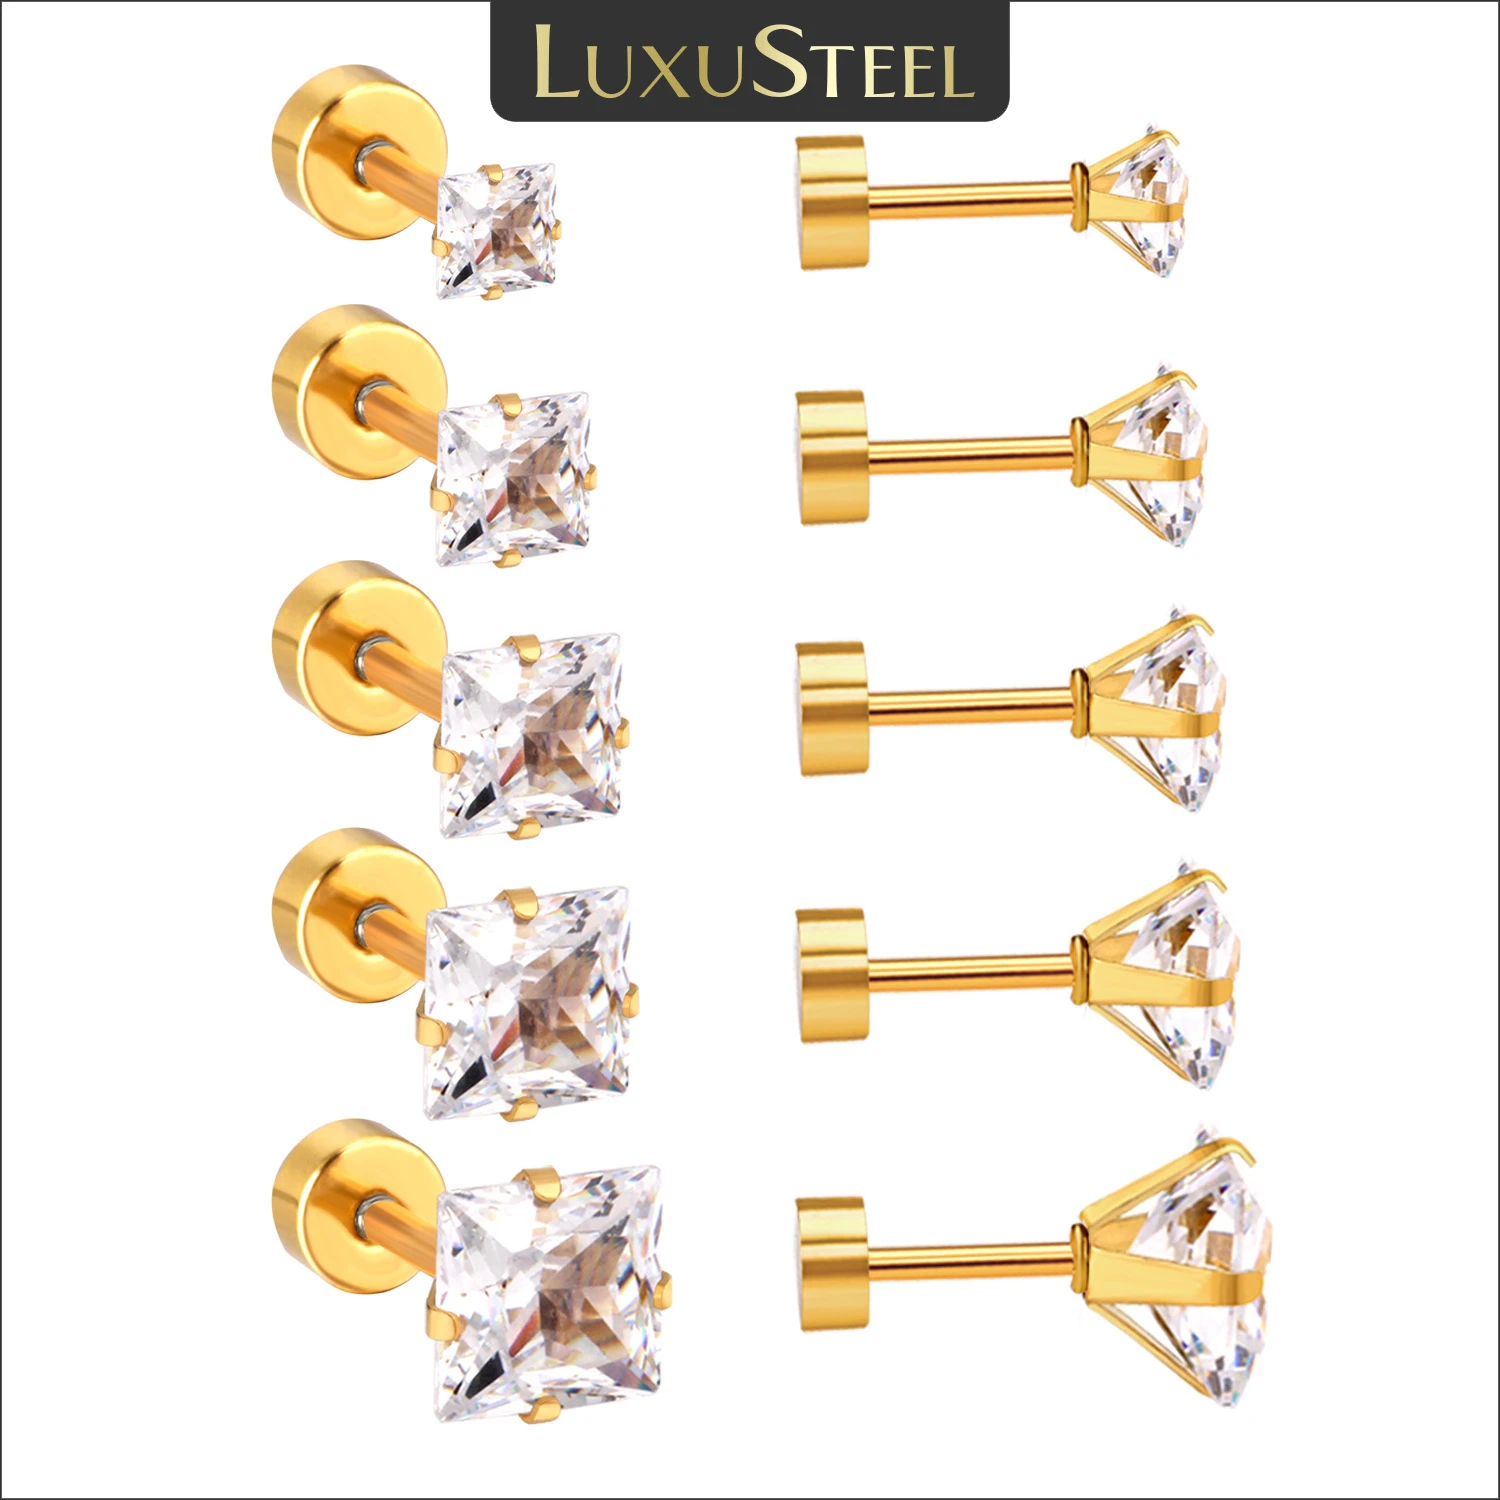 LUXUSTEEL Christmas Earrings Gold Color 5Pairs Sets Stainlesss Steel Size 3mm to 7mm Square Screw Stud Earring Jewlery